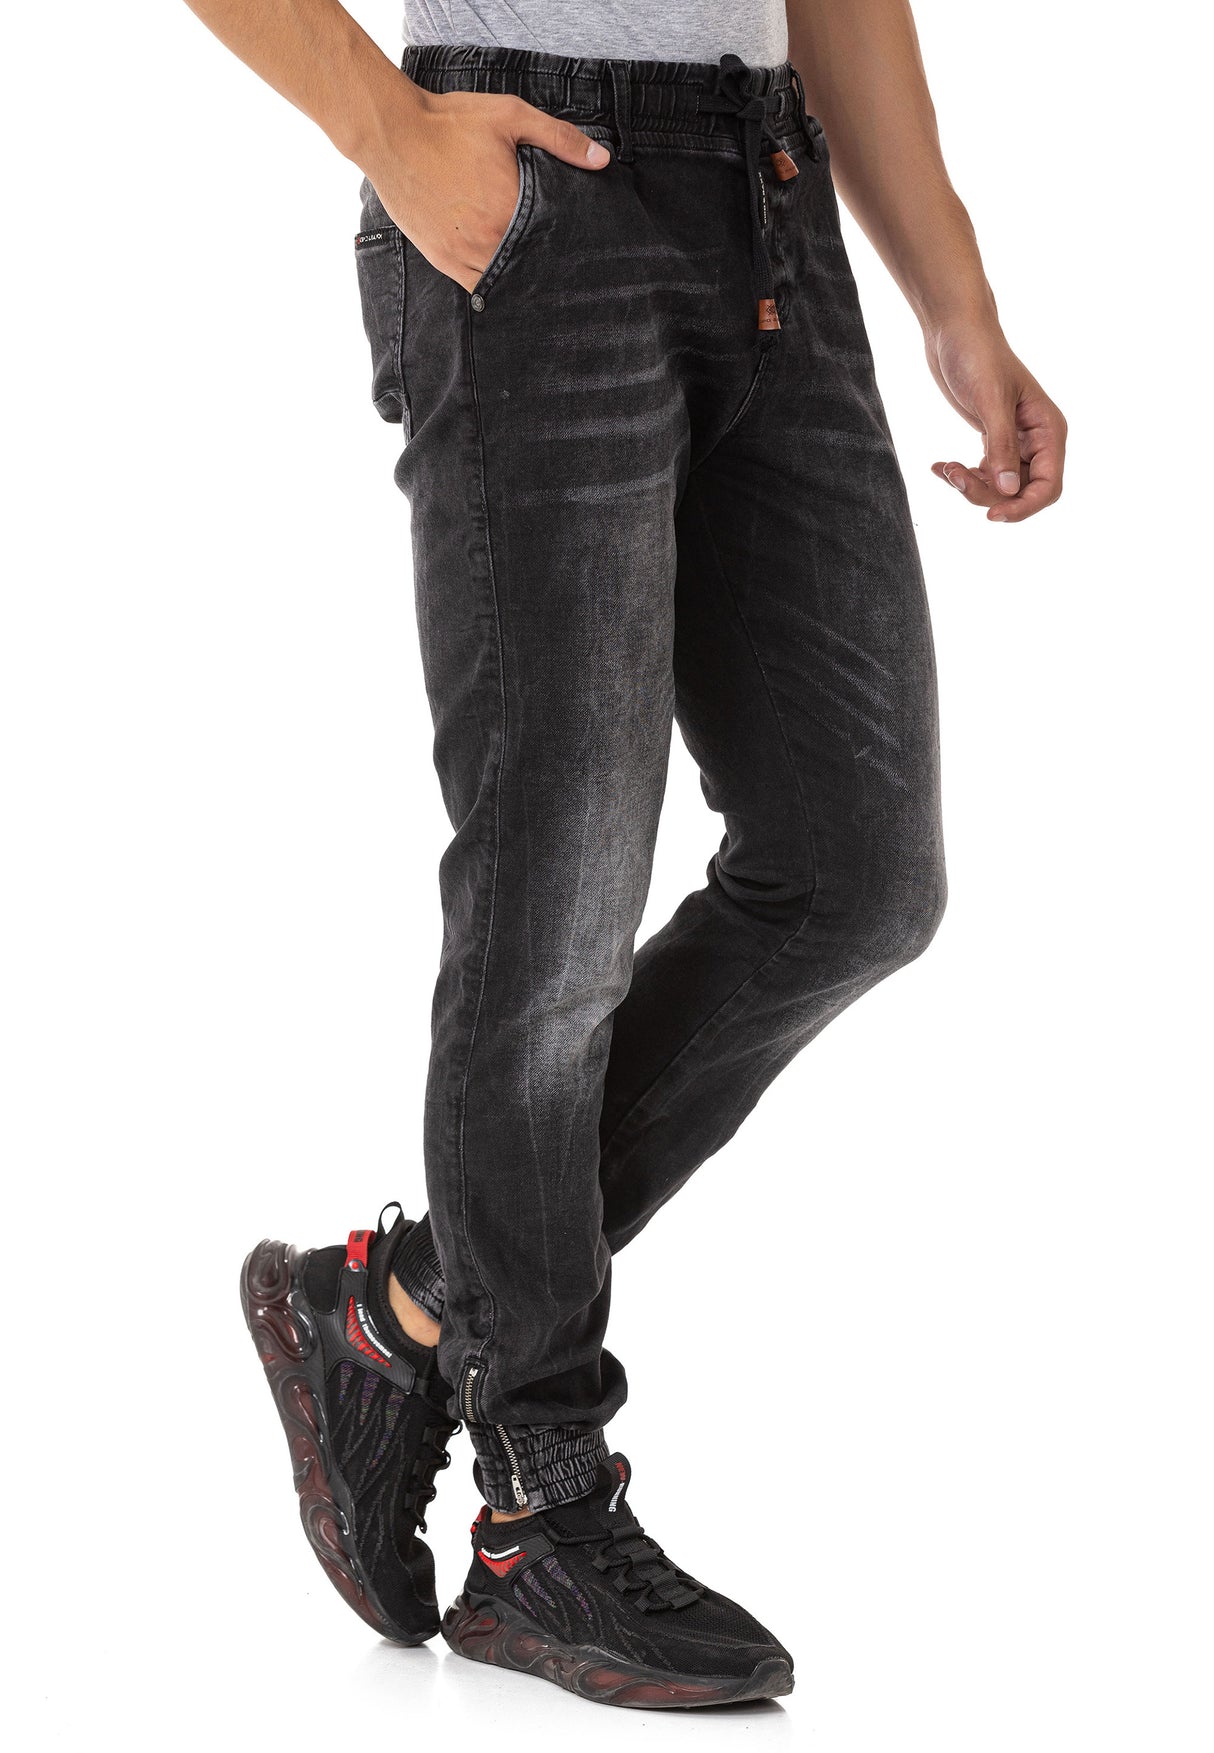 CD807 men's jeans with elastic basic look